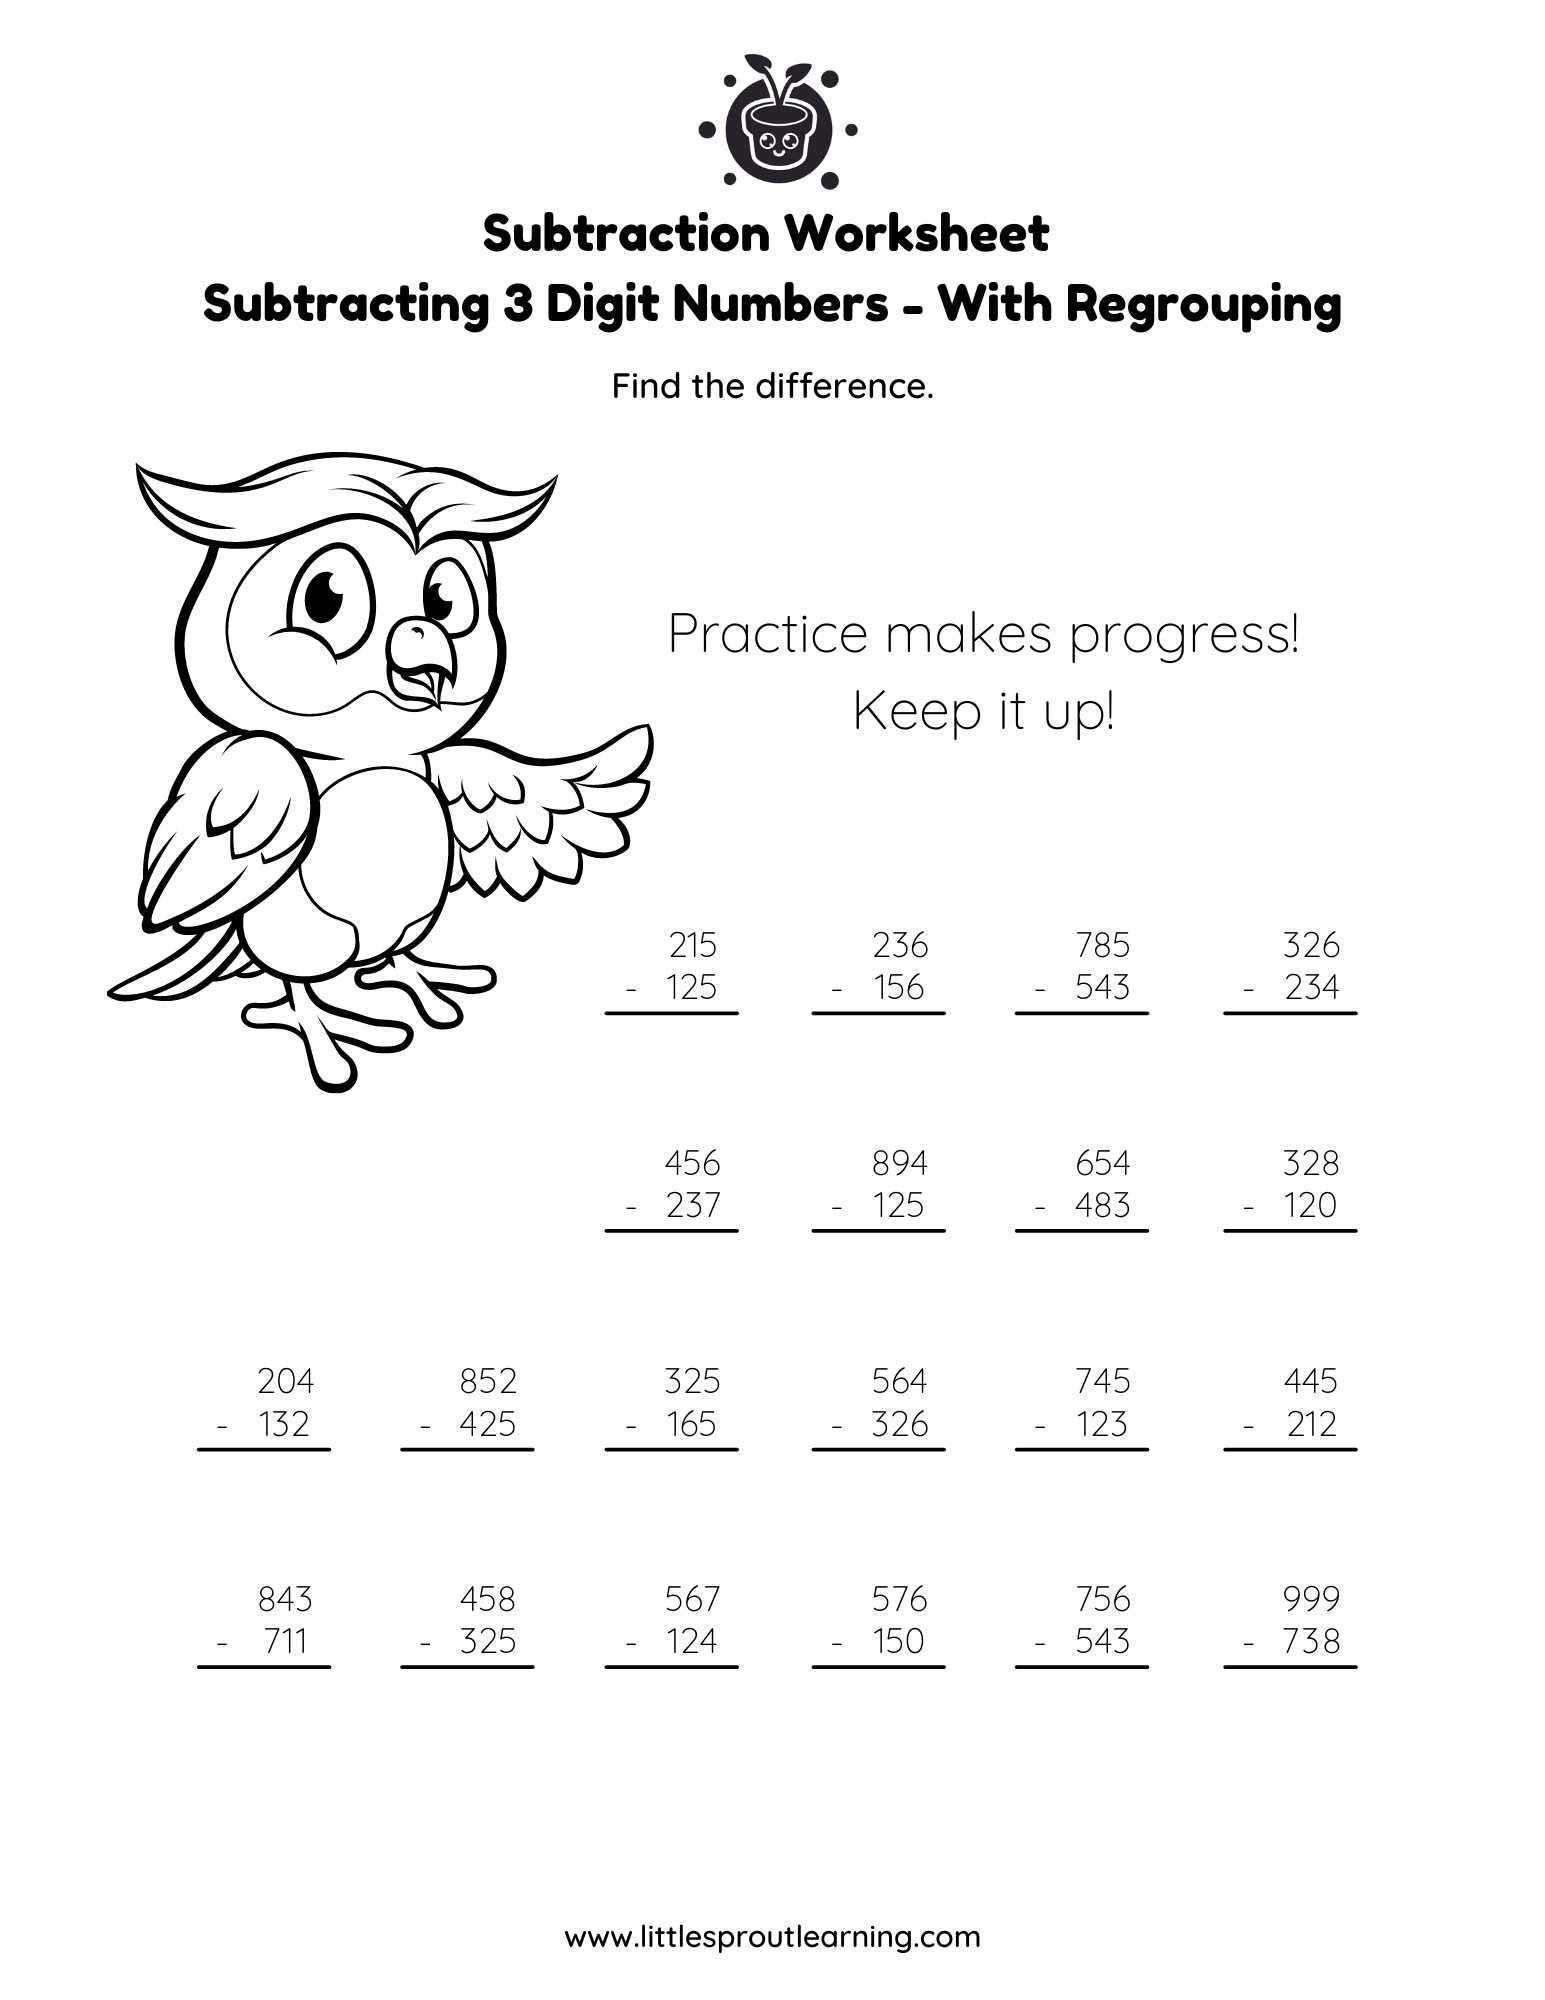 Subtracting 3 Digit Numbers – With Regrouping